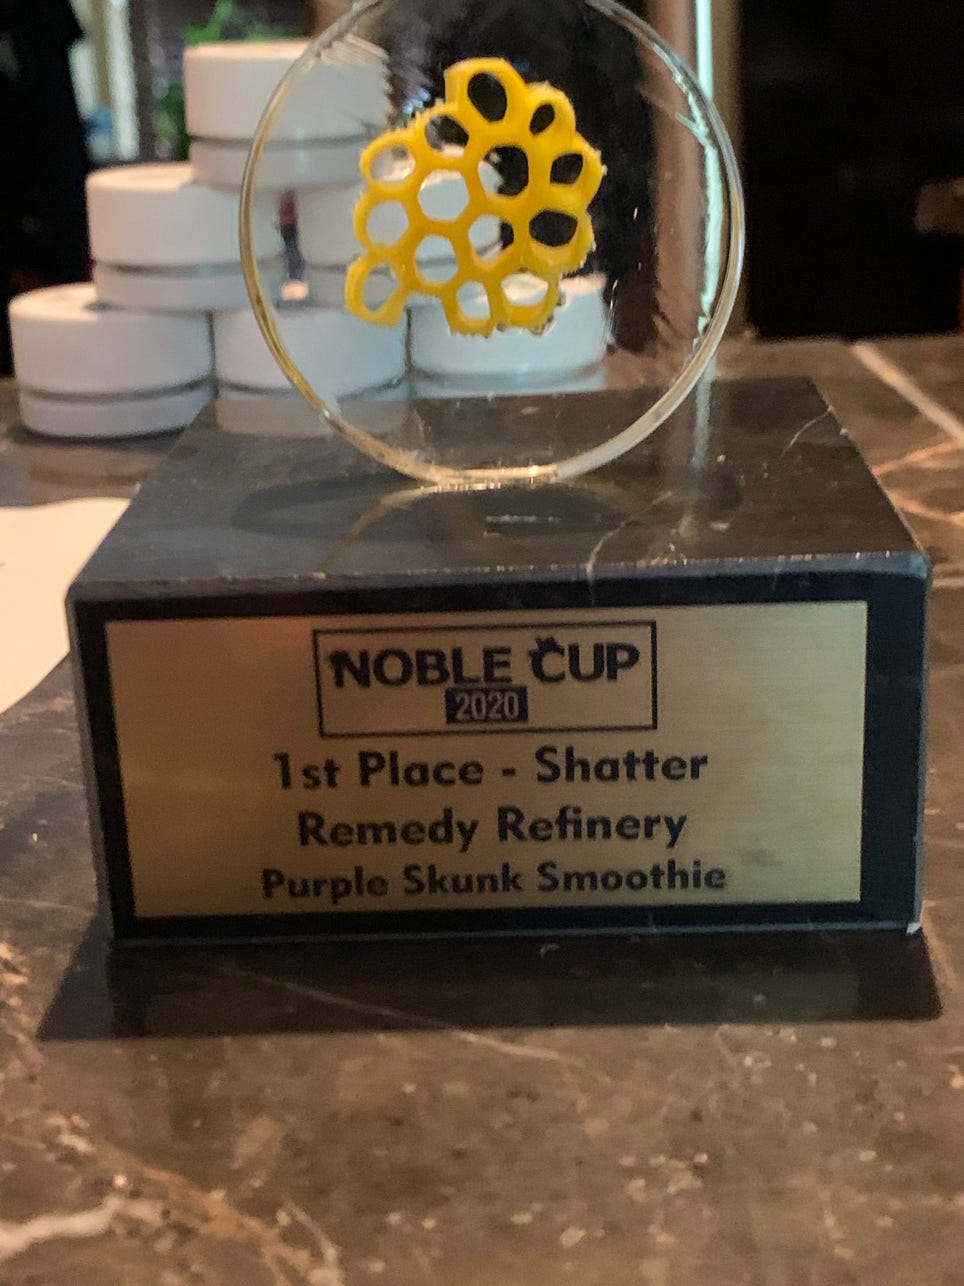 Remedy Refinery Noble Cup 2020 Award Winner, Shatter